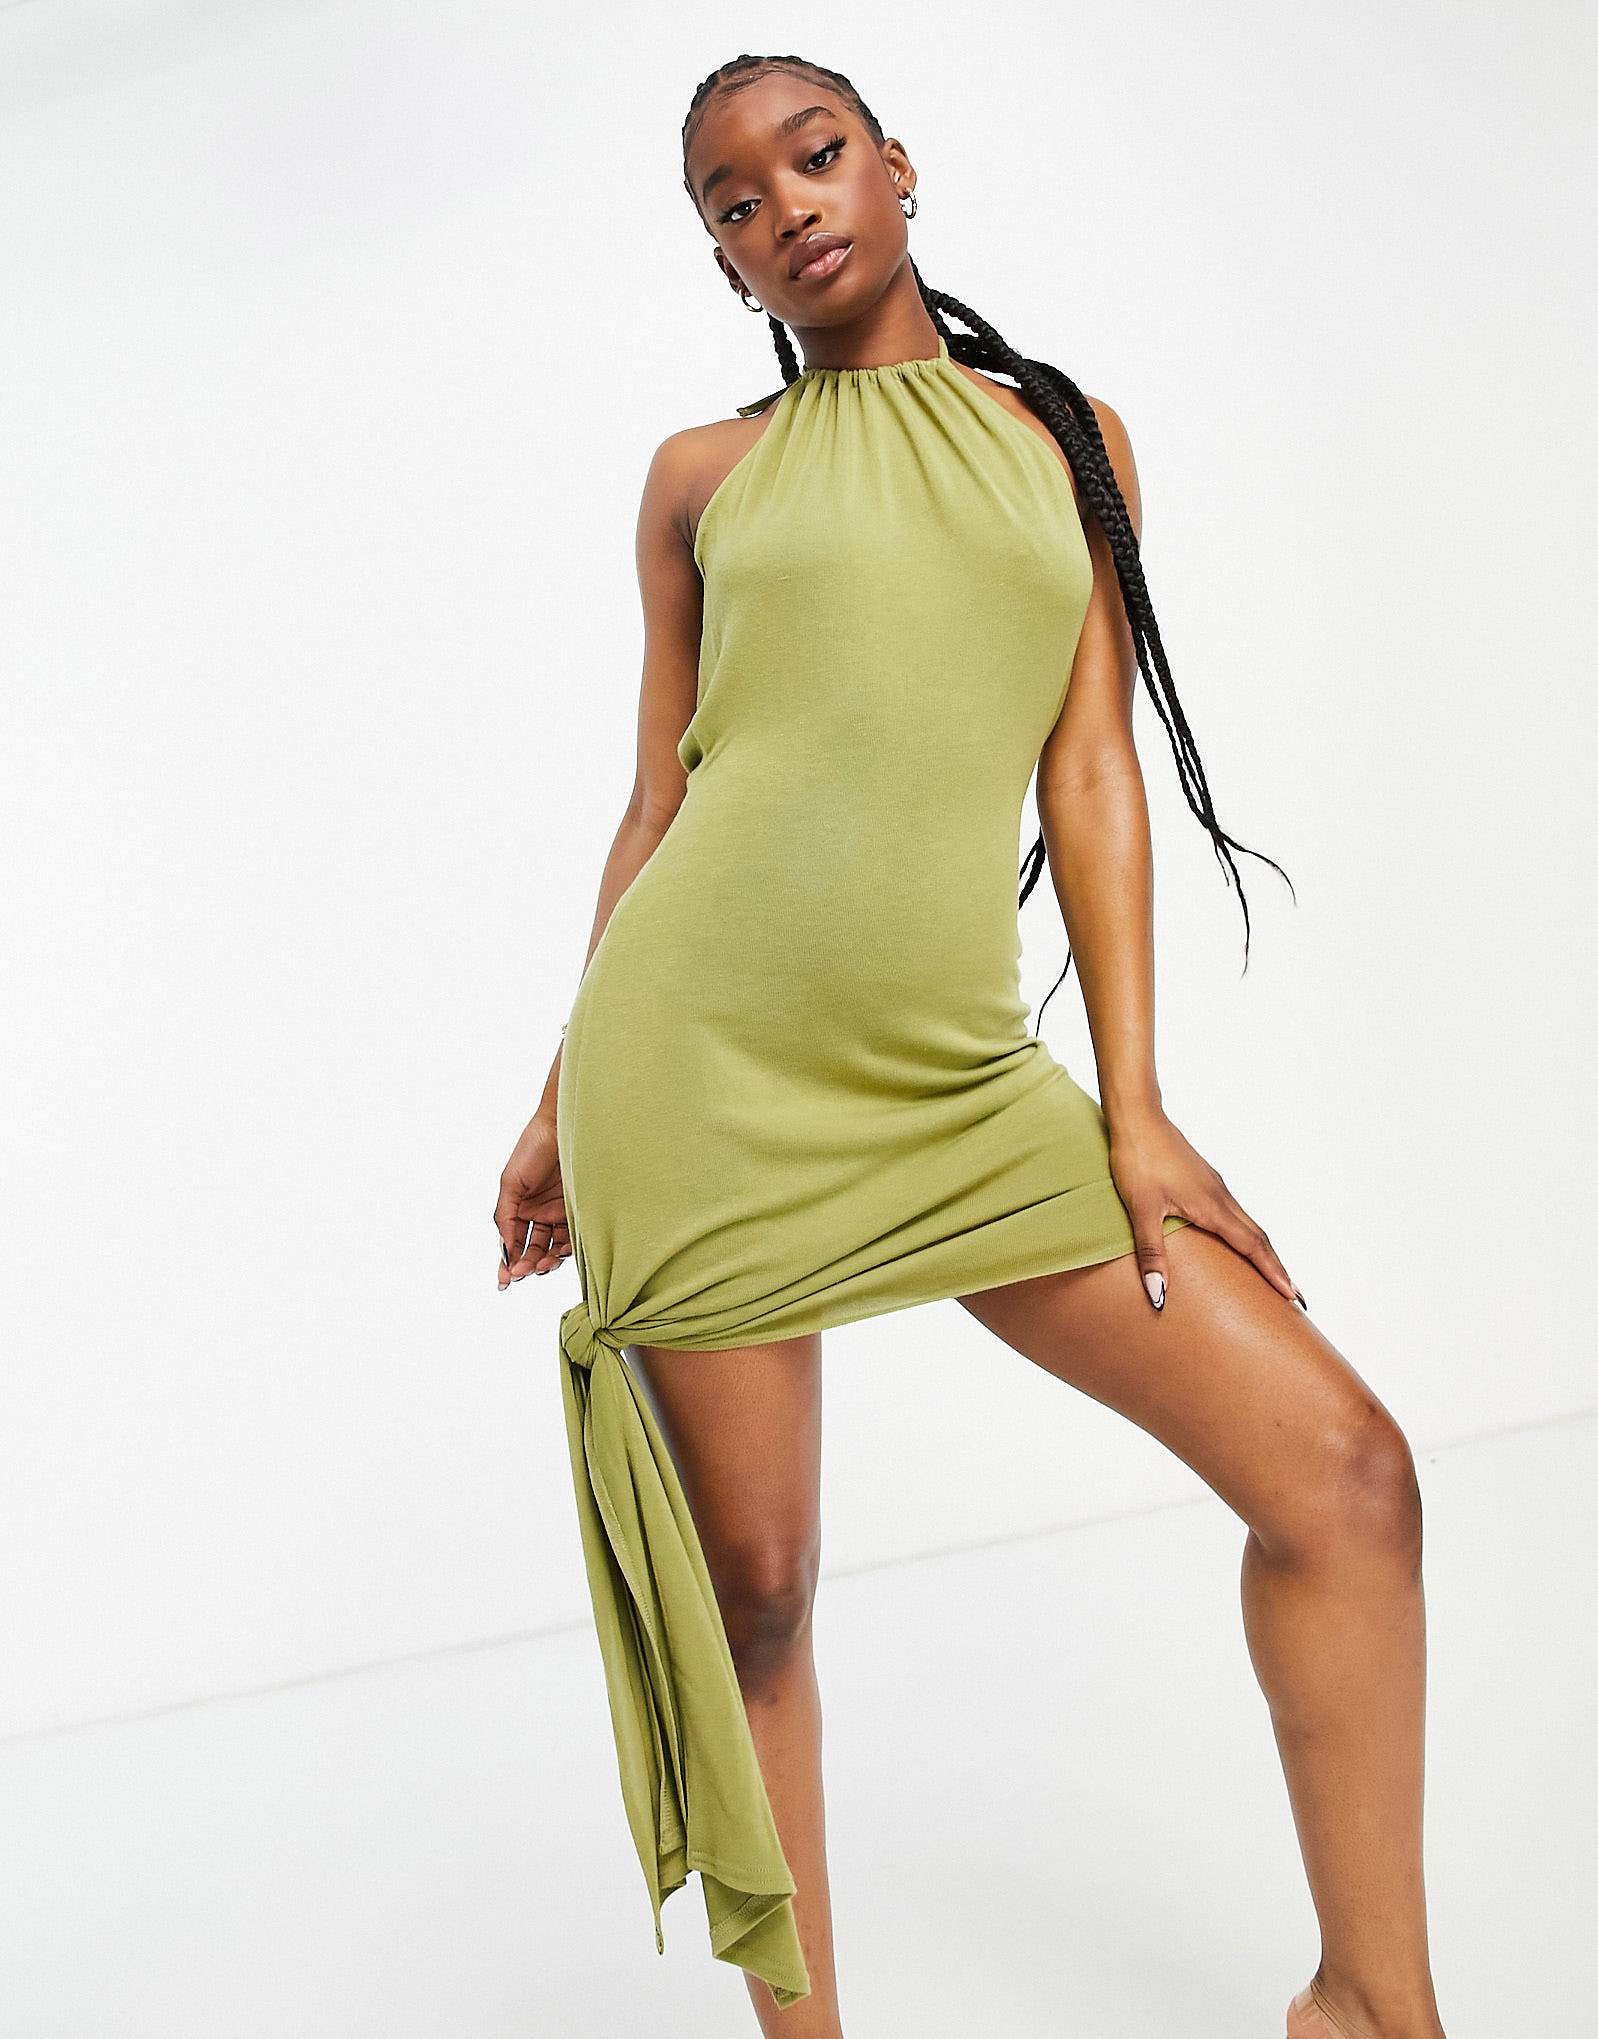 5 Summer Dress Trends That'll Give You That Hot Girl Summer Look